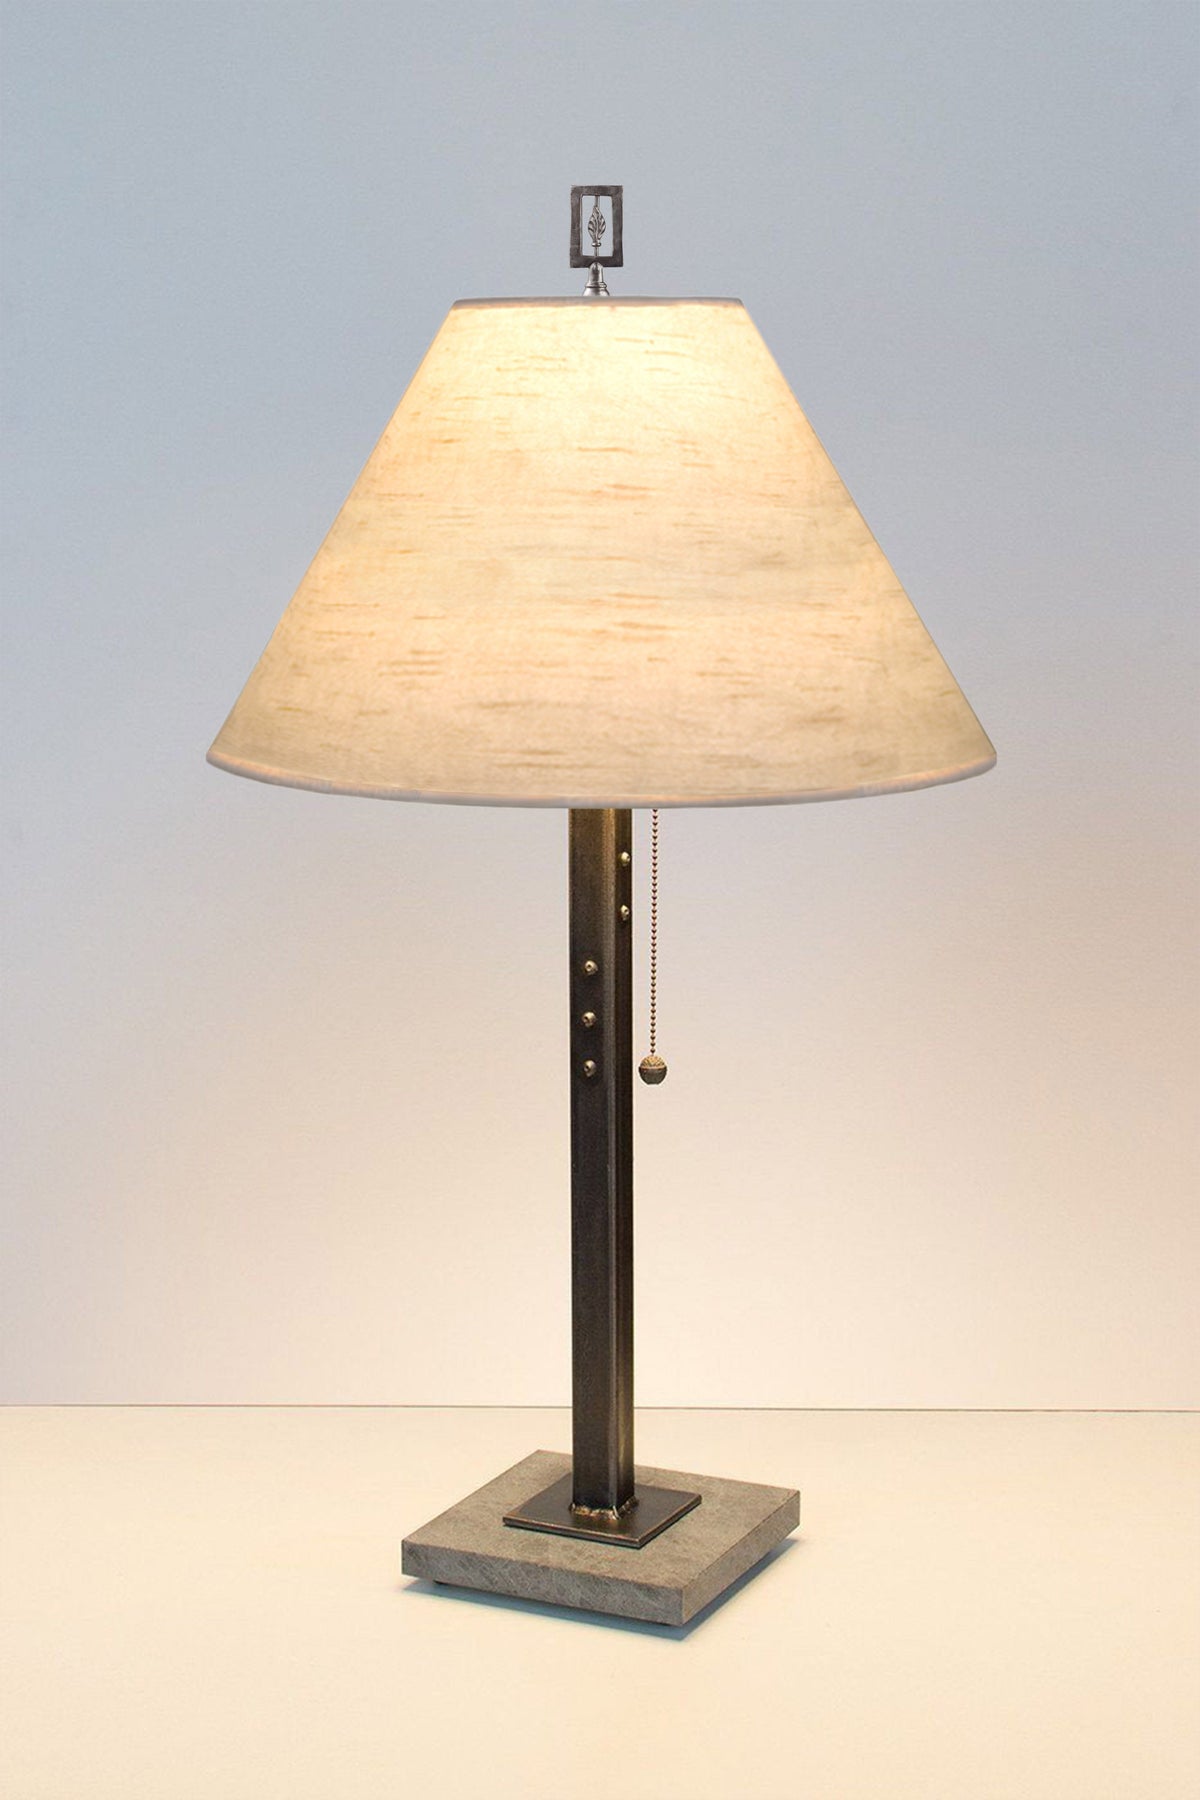 Steel Table Lamp with Medium Conical Shade in Simply Birch